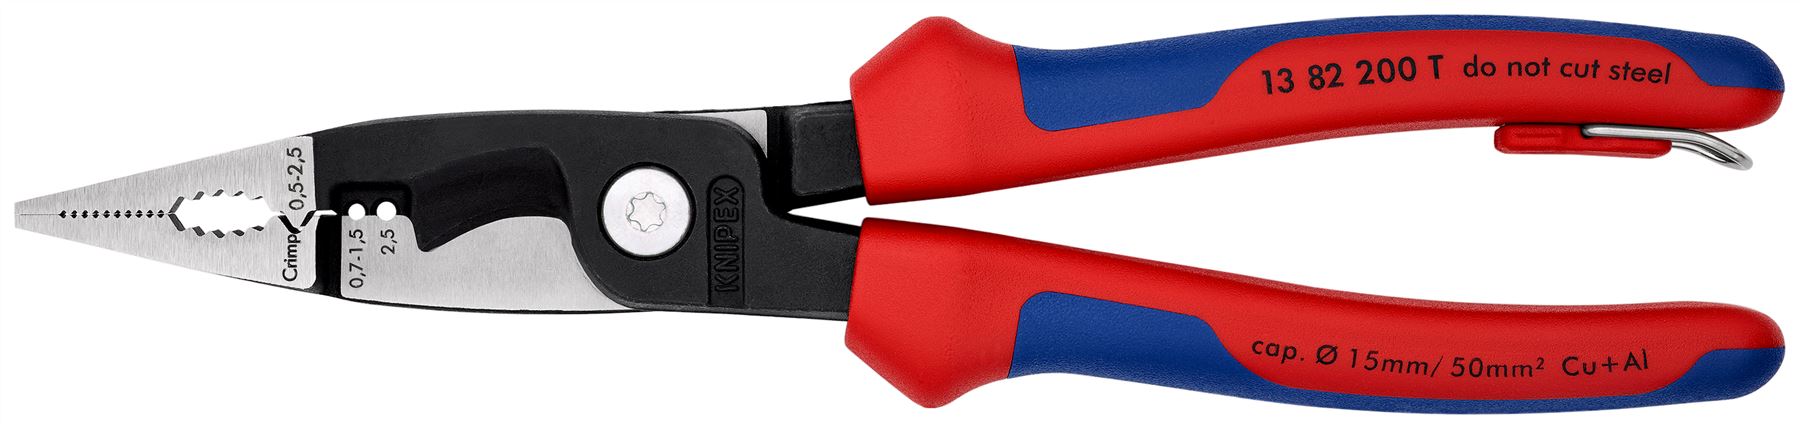 Knipex Electrical Installation Pliers 200mm Multi Component Grips with Tether Point 13 82 200 T